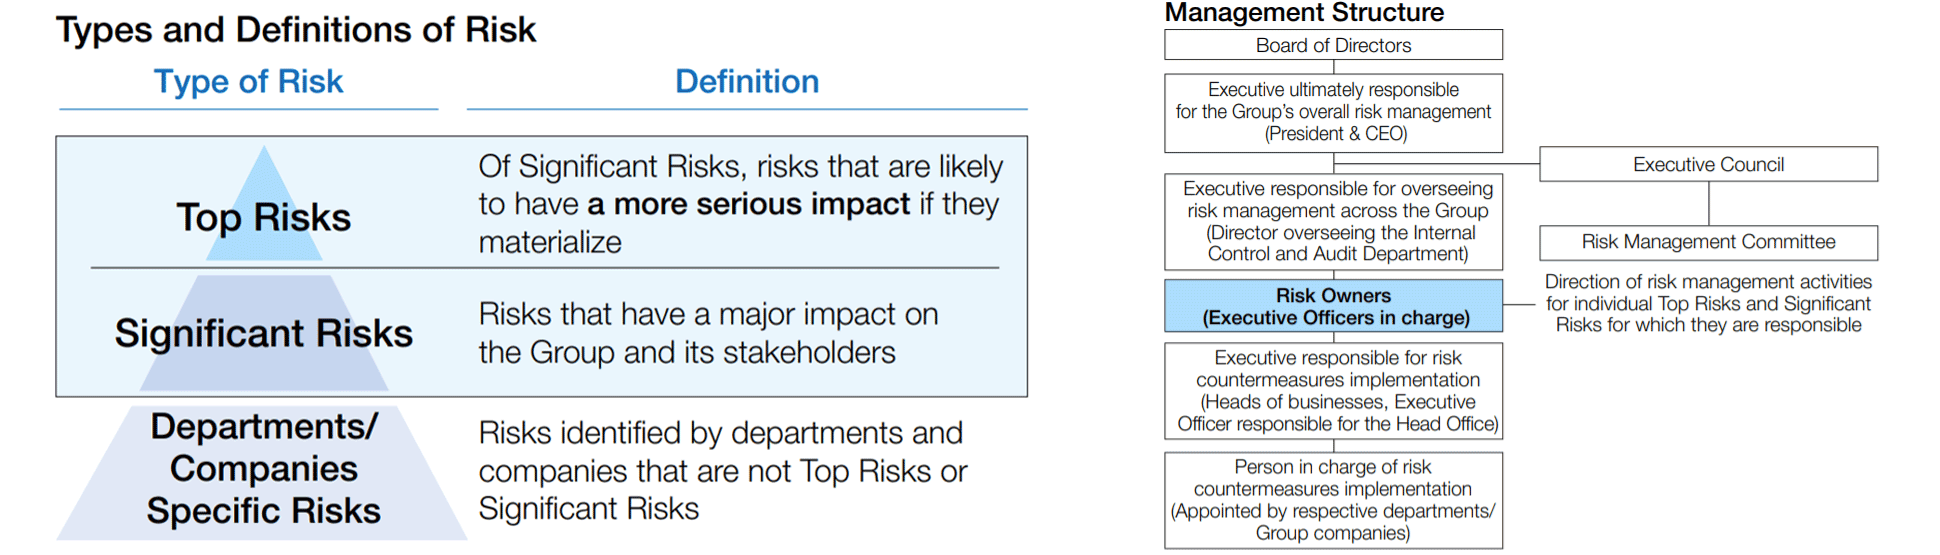 Types and Definitions of Risk&Framework